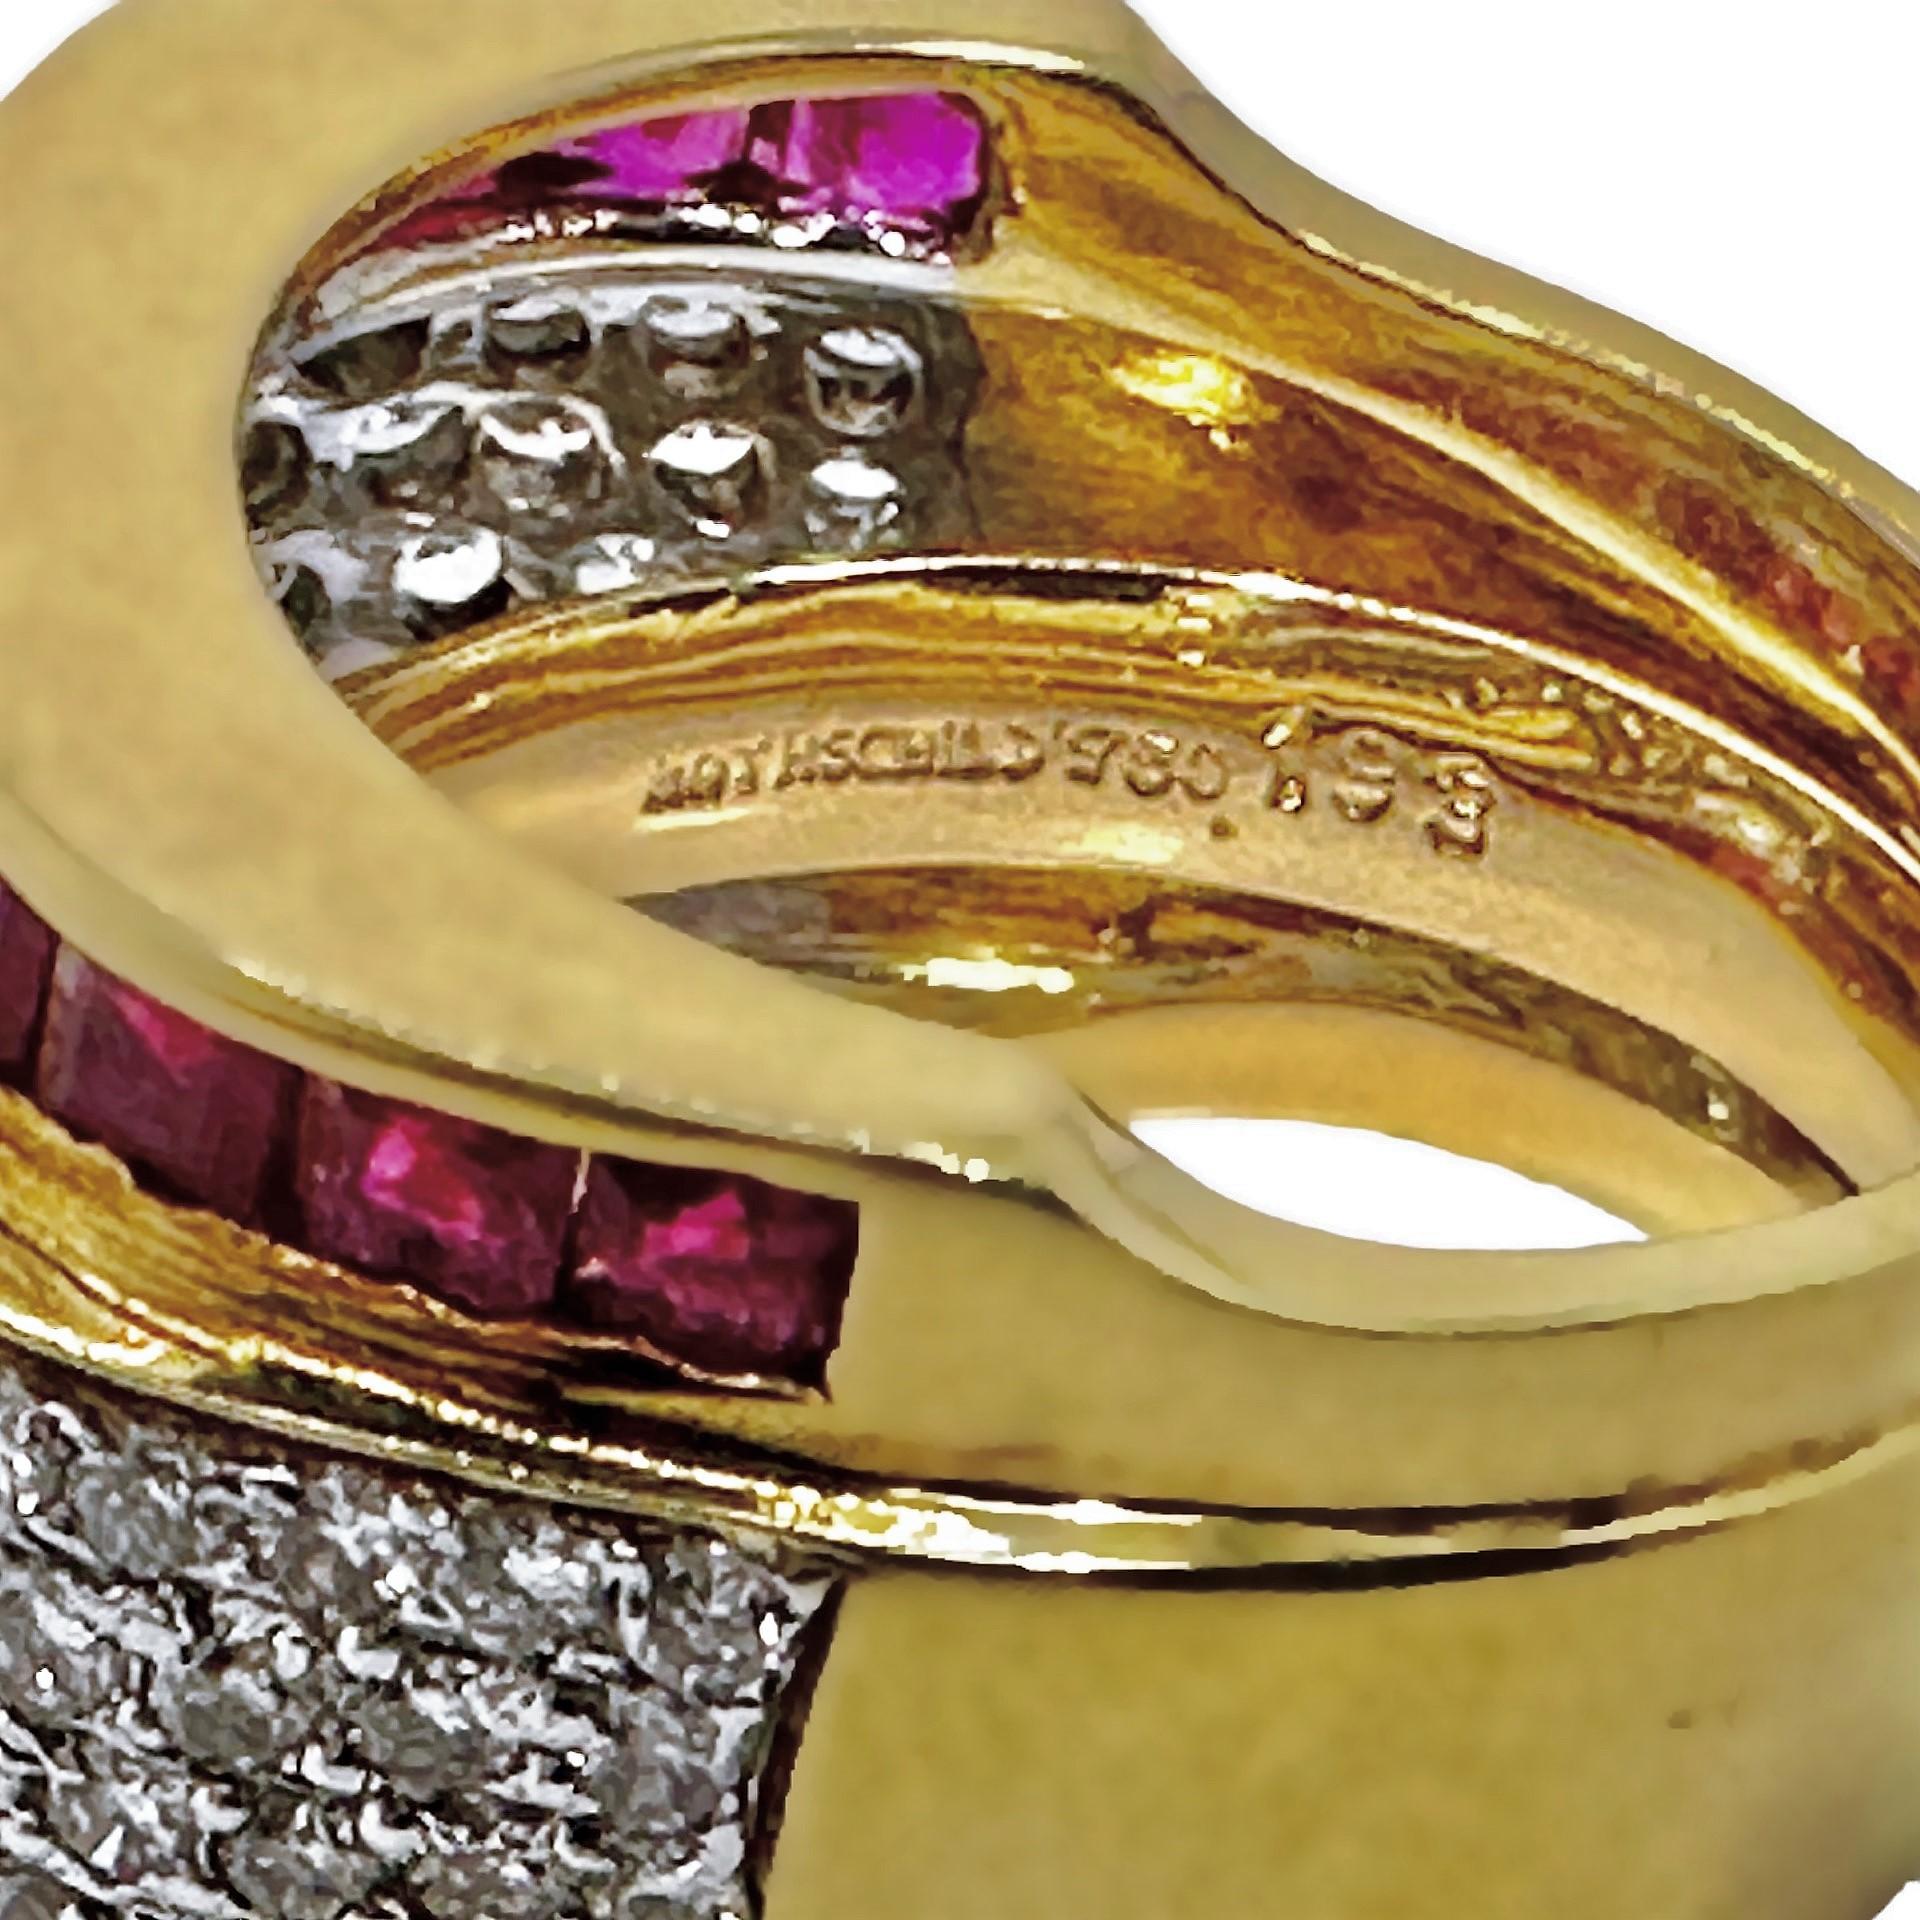 Wide and Tailored 18k Gold Band Ring with Diamonds and Vivid Rubies For Sale 3